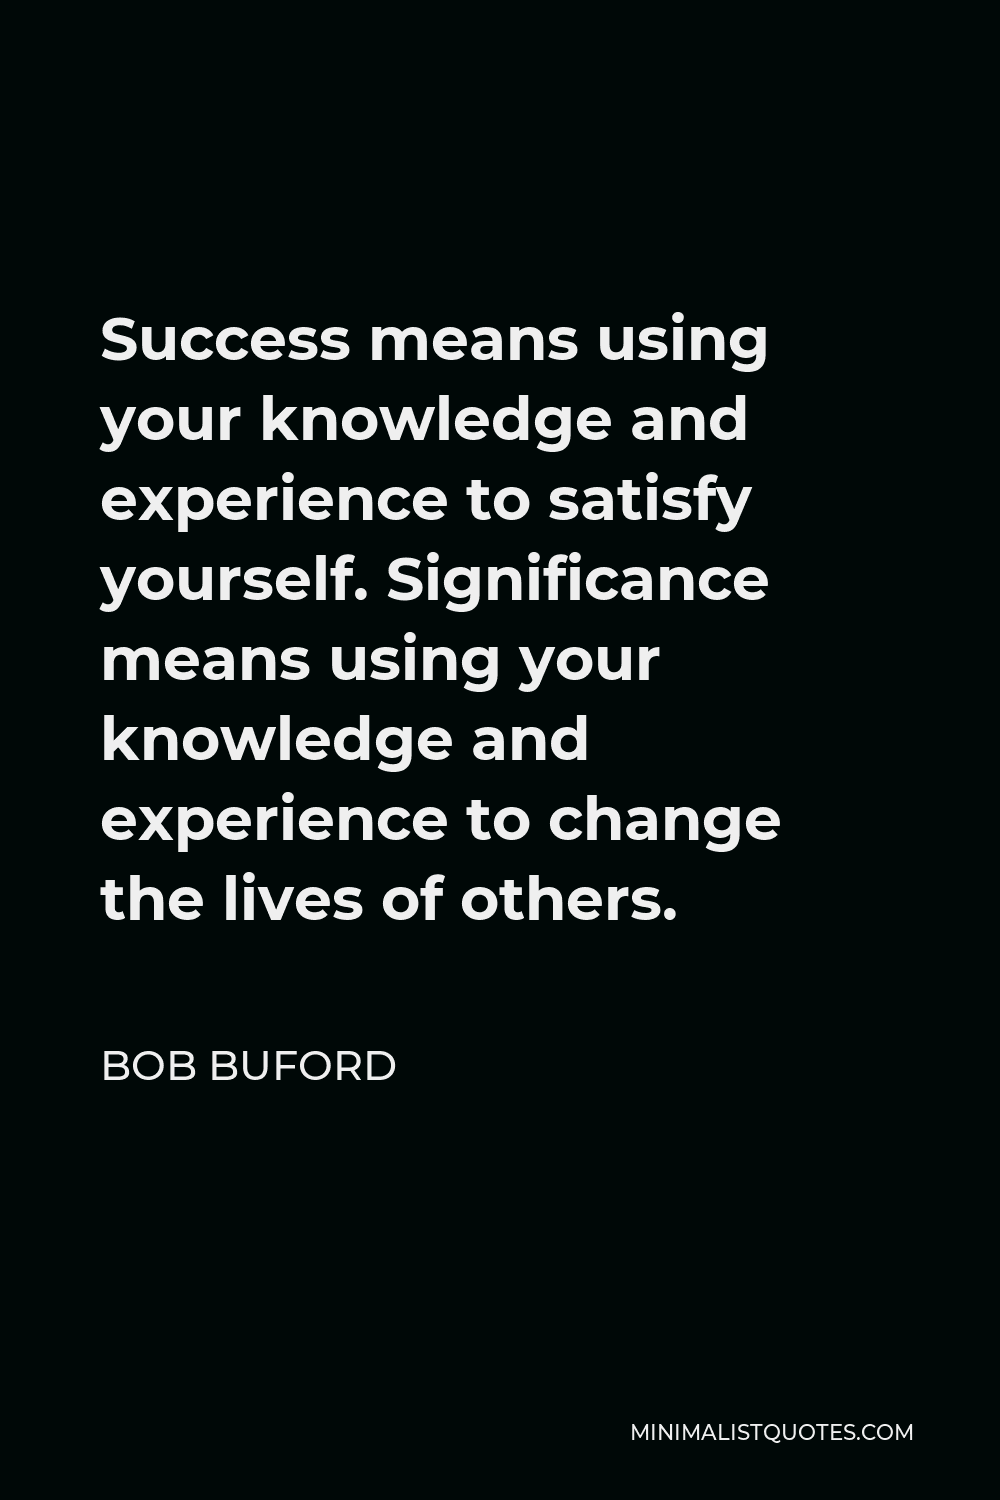 Bob Buford Quote - Success means using your knowledge and experience to satisfy yourself. Significance means using your knowledge and experience to change the lives of others.